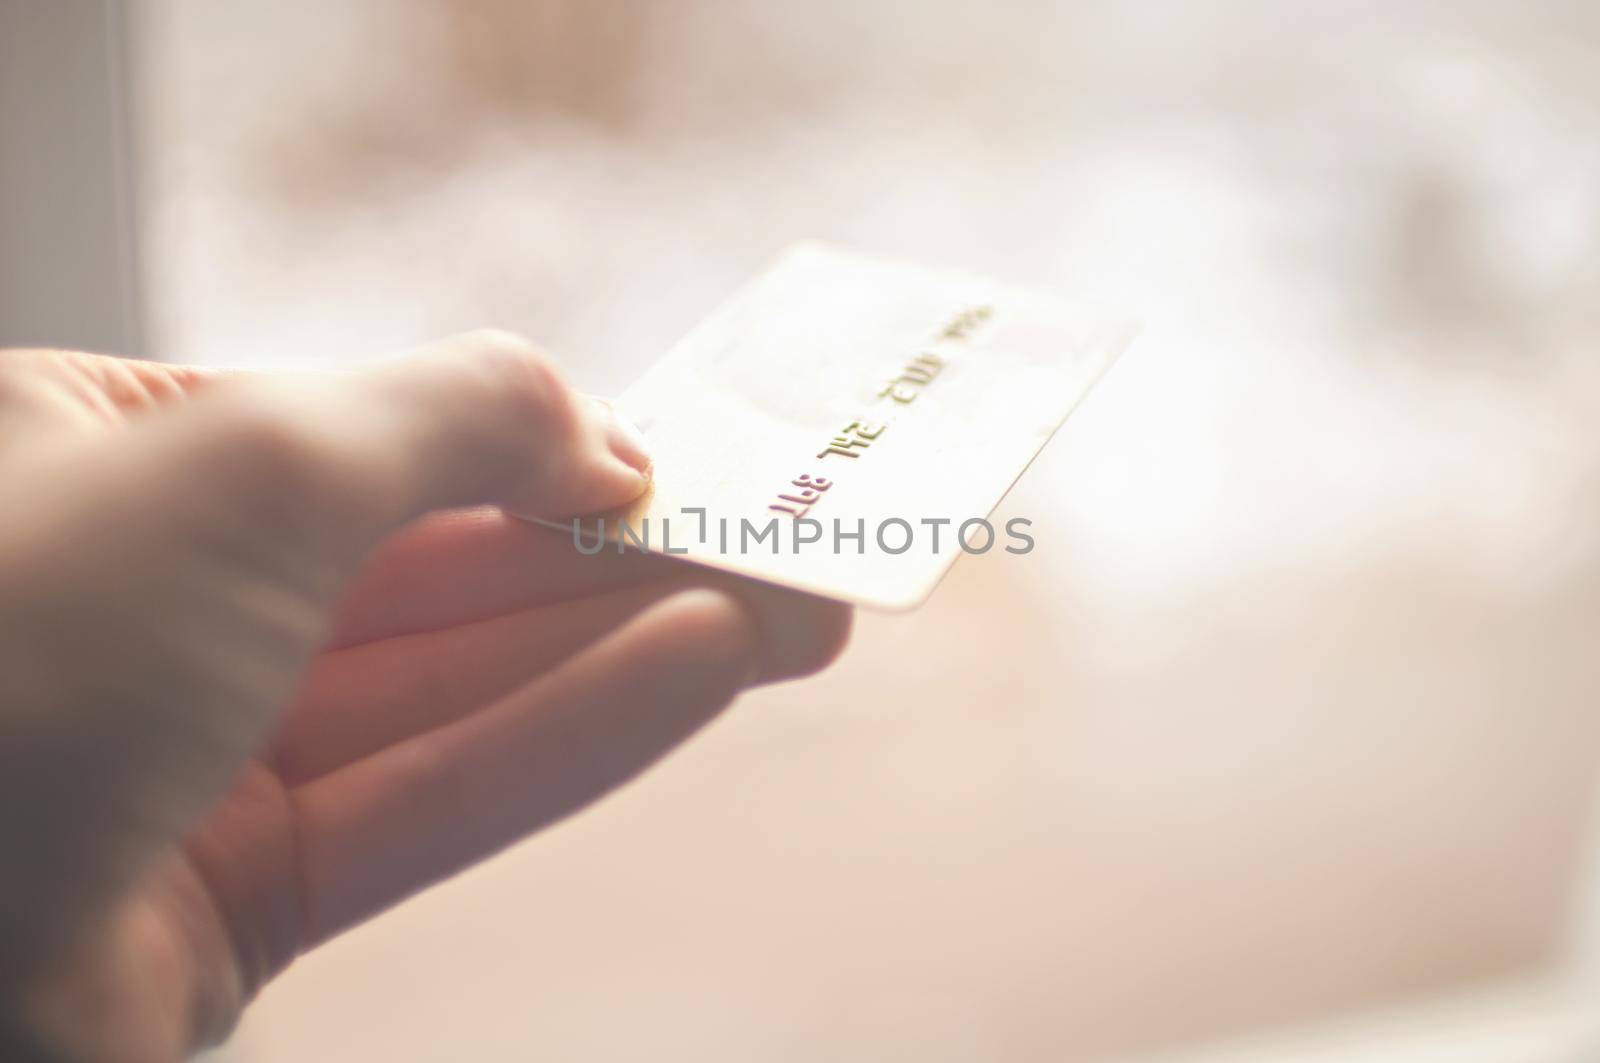 bank card of gold color in hands on a background of sunlight